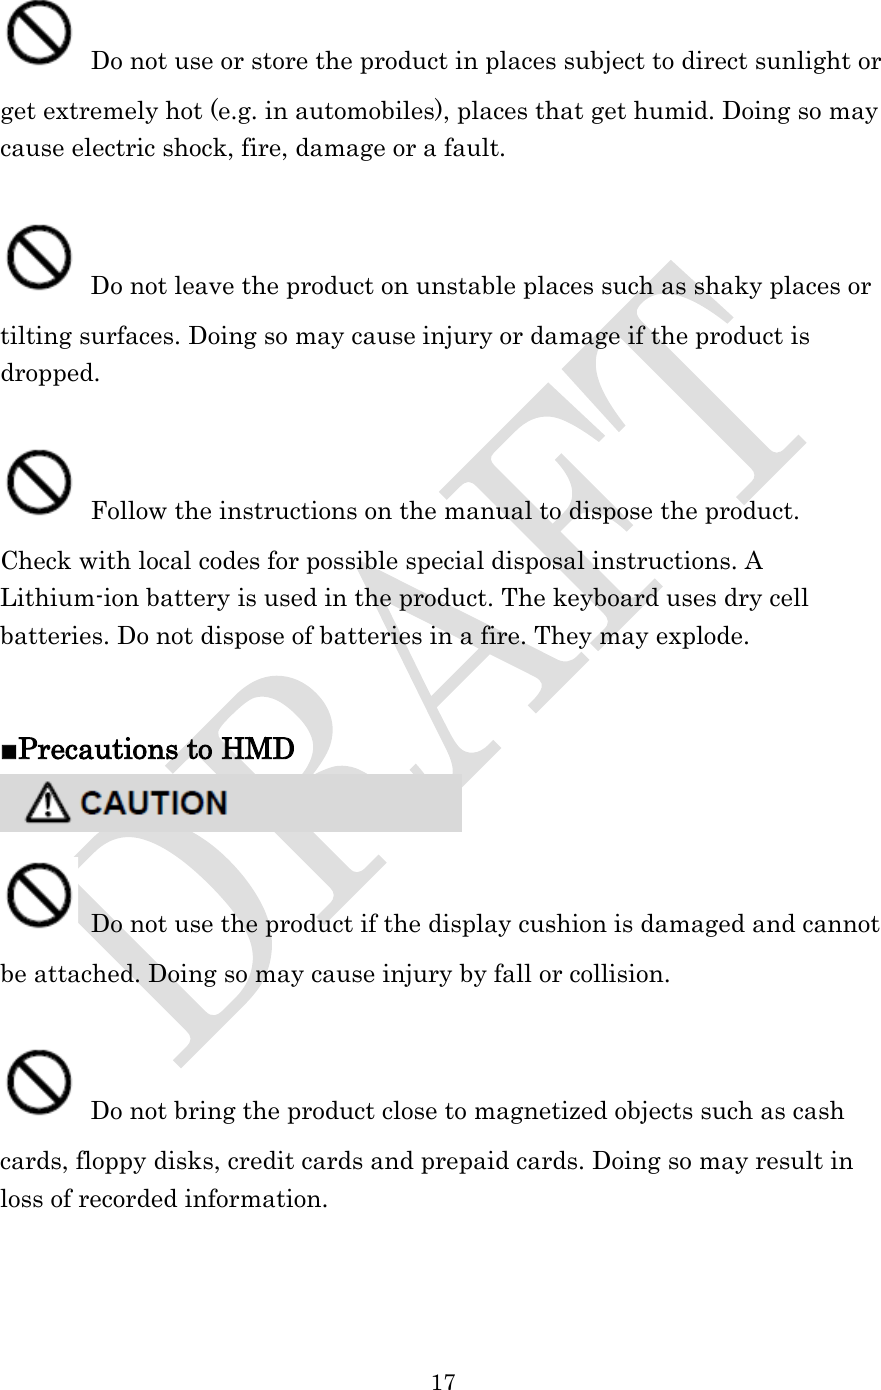  17   Do not use or store the product in places subject to direct sunlight or get extremely hot (e.g. in automobiles), places that get humid. Doing so may cause electric shock, fire, damage or a fault.   Do not leave the product on unstable places such as shaky places or tilting surfaces. Doing so may cause injury or damage if the product is dropped.   Follow the instructions on the manual to dispose the product.   Check with local codes for possible special disposal instructions. A Lithium-ion battery is used in the product. The keyboard uses dry cell batteries. Do not dispose of batteries in a fire. They may explode.     ■Precautions to HMD   Do not use the product if the display cushion is damaged and cannot be attached. Doing so may cause injury by fall or collision.   Do not bring the product close to magnetized objects such as cash cards, floppy disks, credit cards and prepaid cards. Doing so may result in loss of recorded information.  